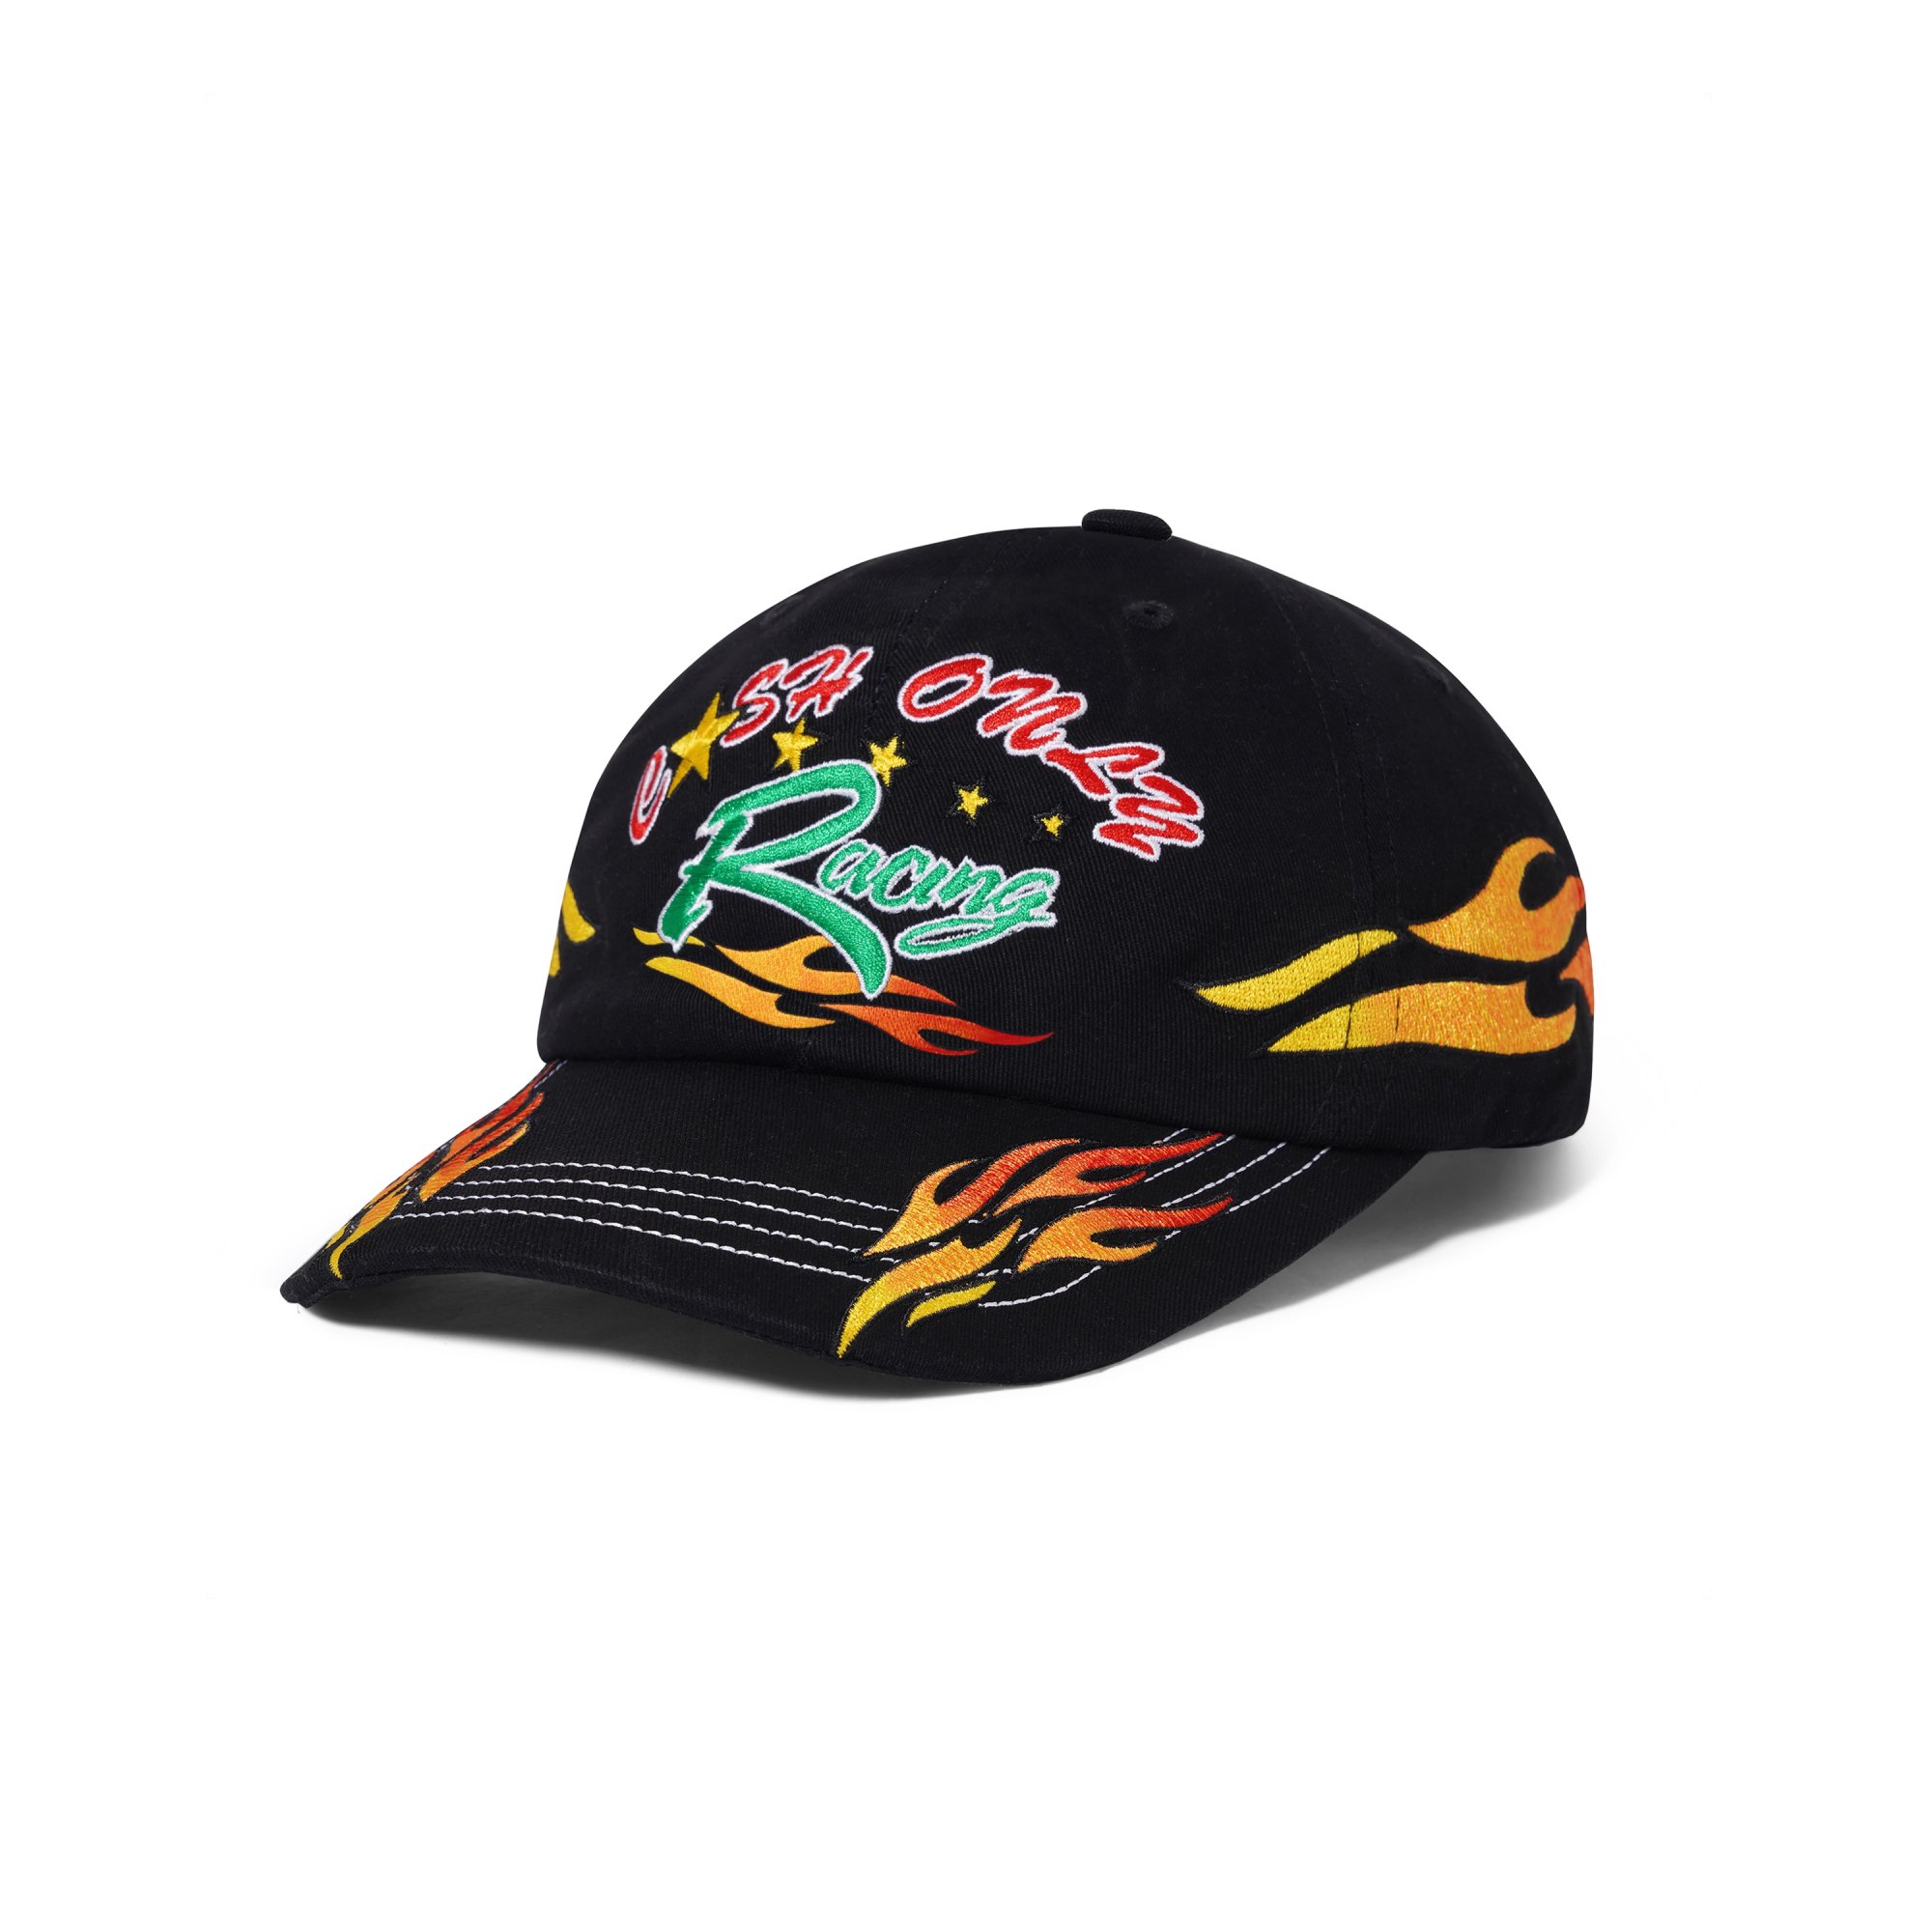 Cash Only<br>Racing Flame Cap<br>